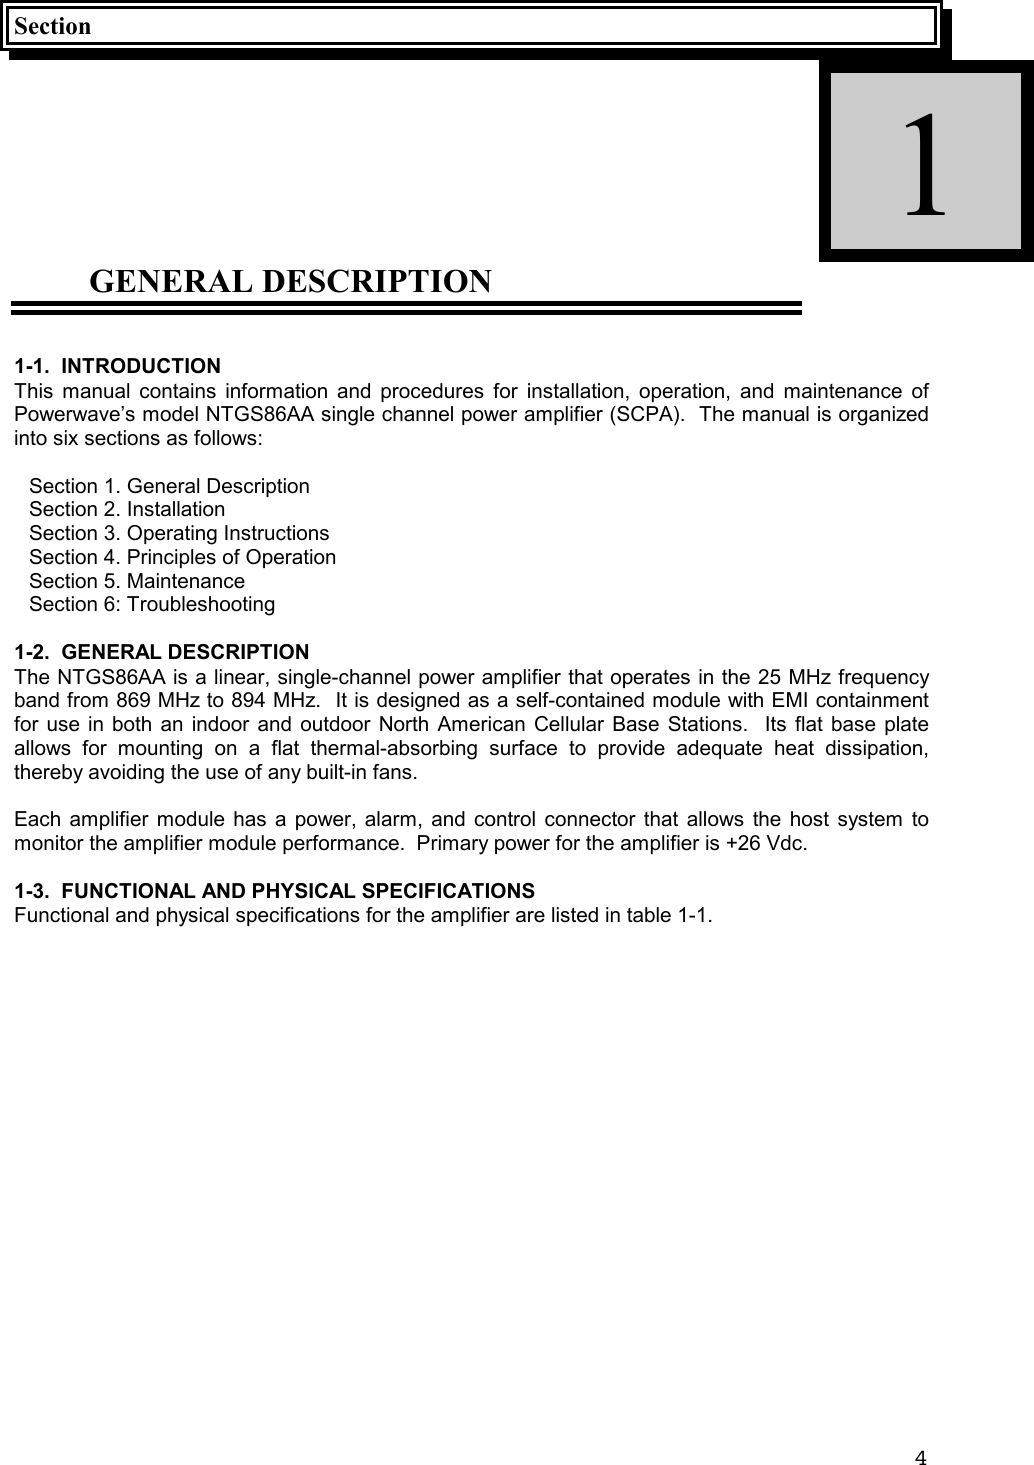 4SectionGENERAL DESCRIPTION1-1.  INTRODUCTIONThis manual contains information and procedures for installation, operation, and maintenance ofPowerwave’s model NTGS86AA single channel power amplifier (SCPA).  The manual is organizedinto six sections as follows:Section 1. General DescriptionSection 2. InstallationSection 3. Operating InstructionsSection 4. Principles of OperationSection 5. MaintenanceSection 6: Troubleshooting1-2.  GENERAL DESCRIPTIONThe NTGS86AA is a linear, single-channel power amplifier that operates in the 25 MHz frequencyband from 869 MHz to 894 MHz.  It is designed as a self-contained module with EMI containmentfor use in both an indoor and outdoor North American Cellular Base Stations.  Its flat base plateallows for mounting on a flat thermal-absorbing surface to provide adequate heat dissipation,thereby avoiding the use of any built-in fans.Each amplifier module has a power, alarm, and control connector that allows the host system tomonitor the amplifier module performance.  Primary power for the amplifier is +26 Vdc.1-3.  FUNCTIONAL AND PHYSICAL SPECIFICATIONSFunctional and physical specifications for the amplifier are listed in table 1-1.1